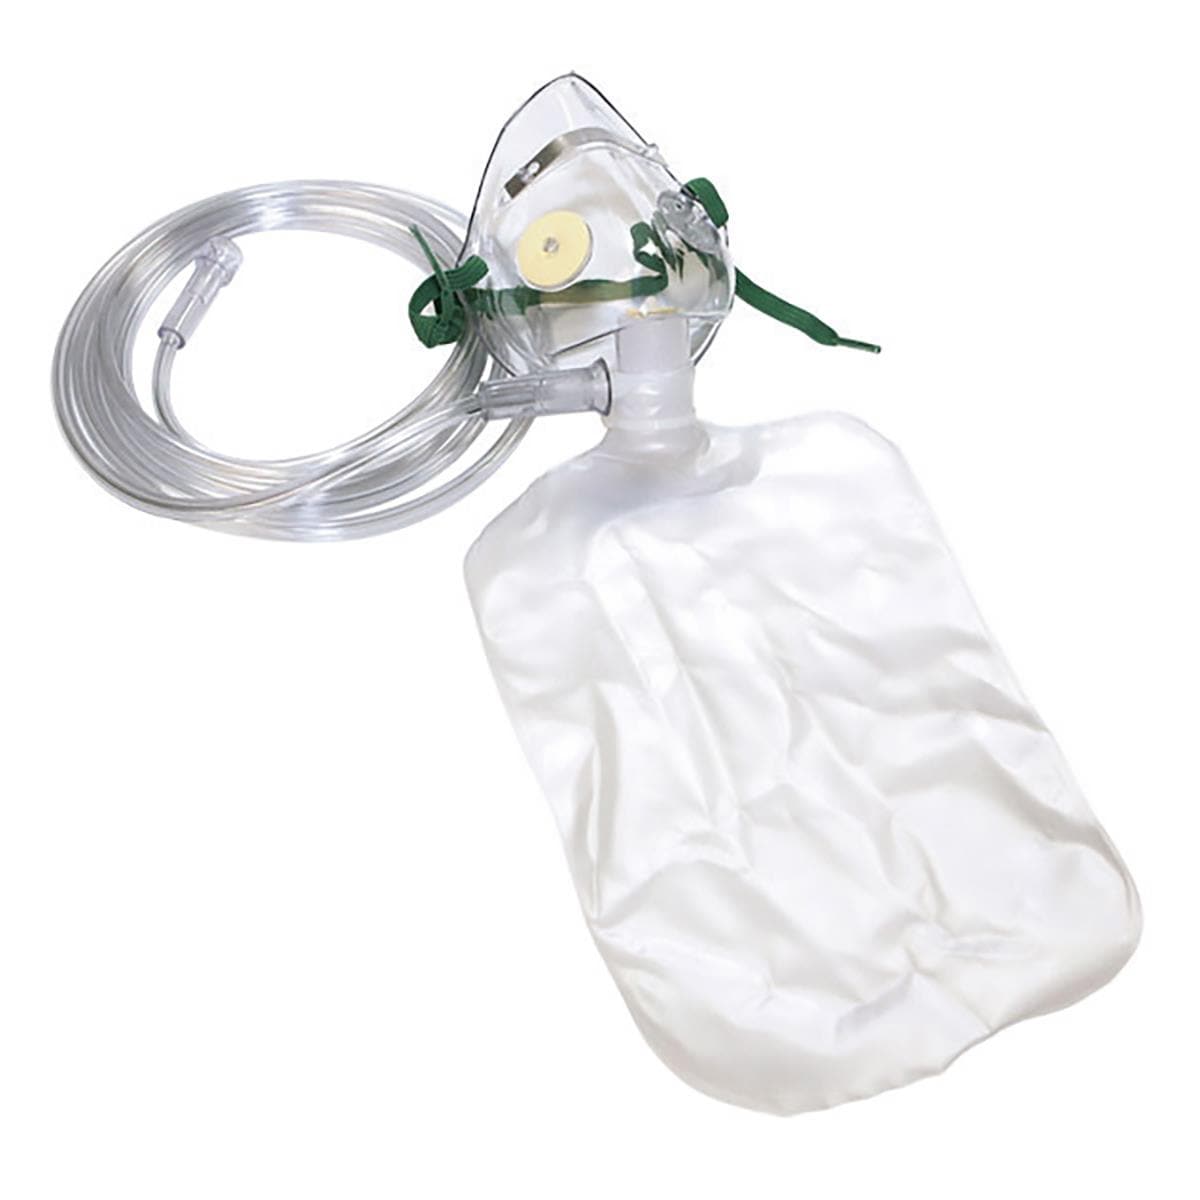 Adult Non-Re-Breathing Mask+ Bag+ Tubing